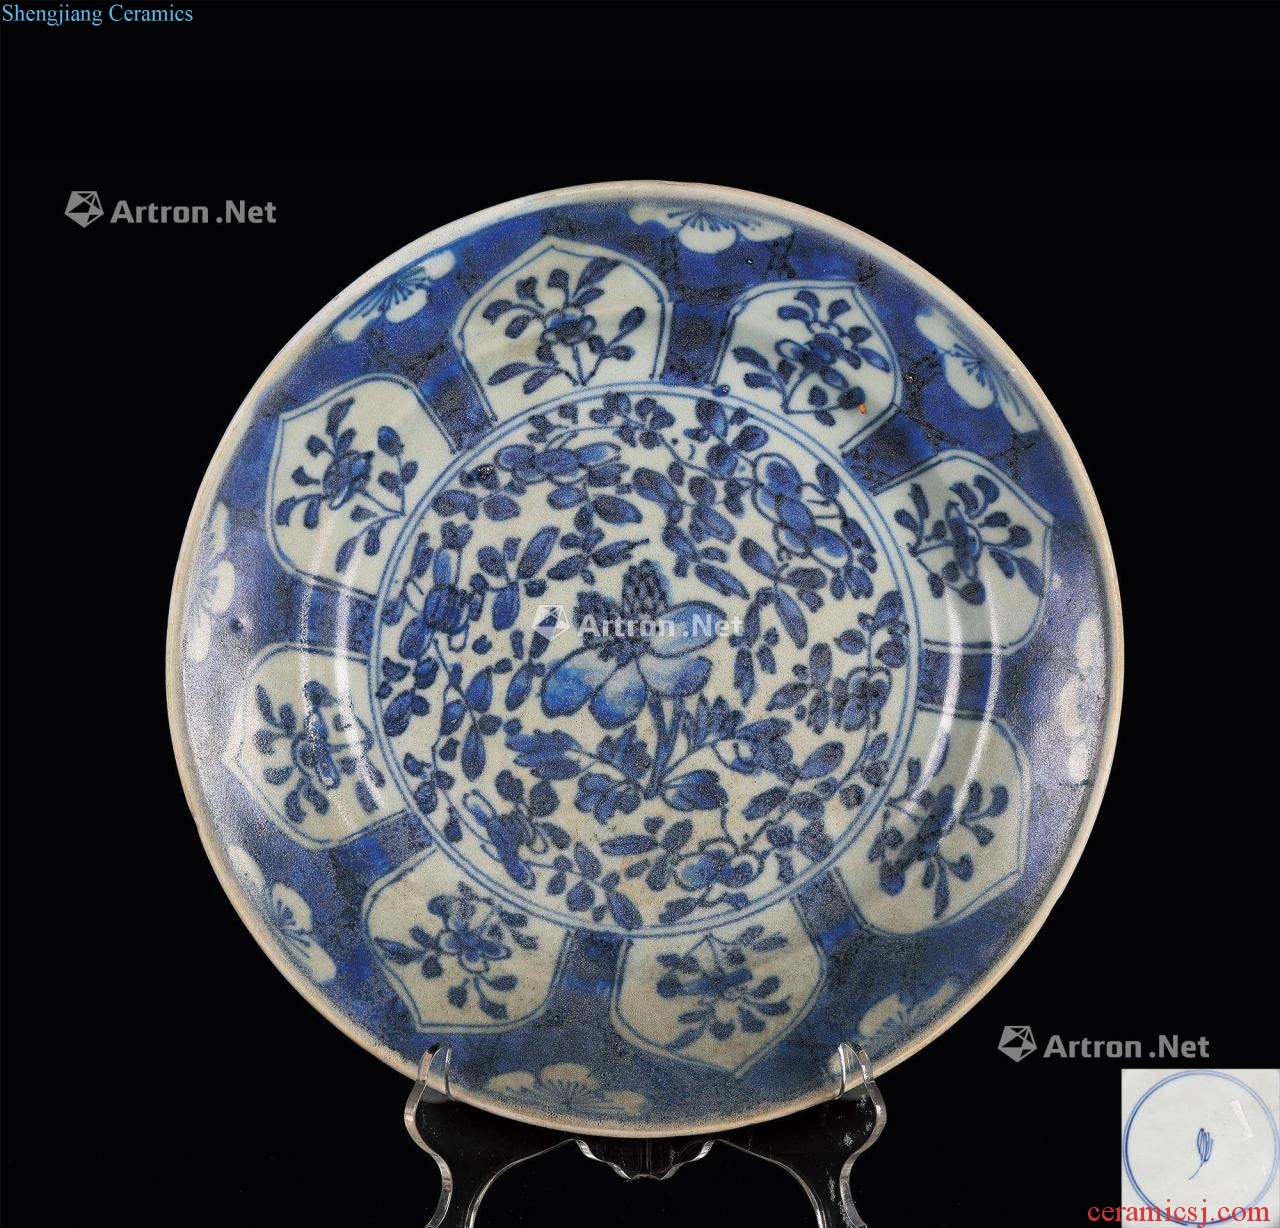 In the qing dynasty Blue and white medallion flower tray